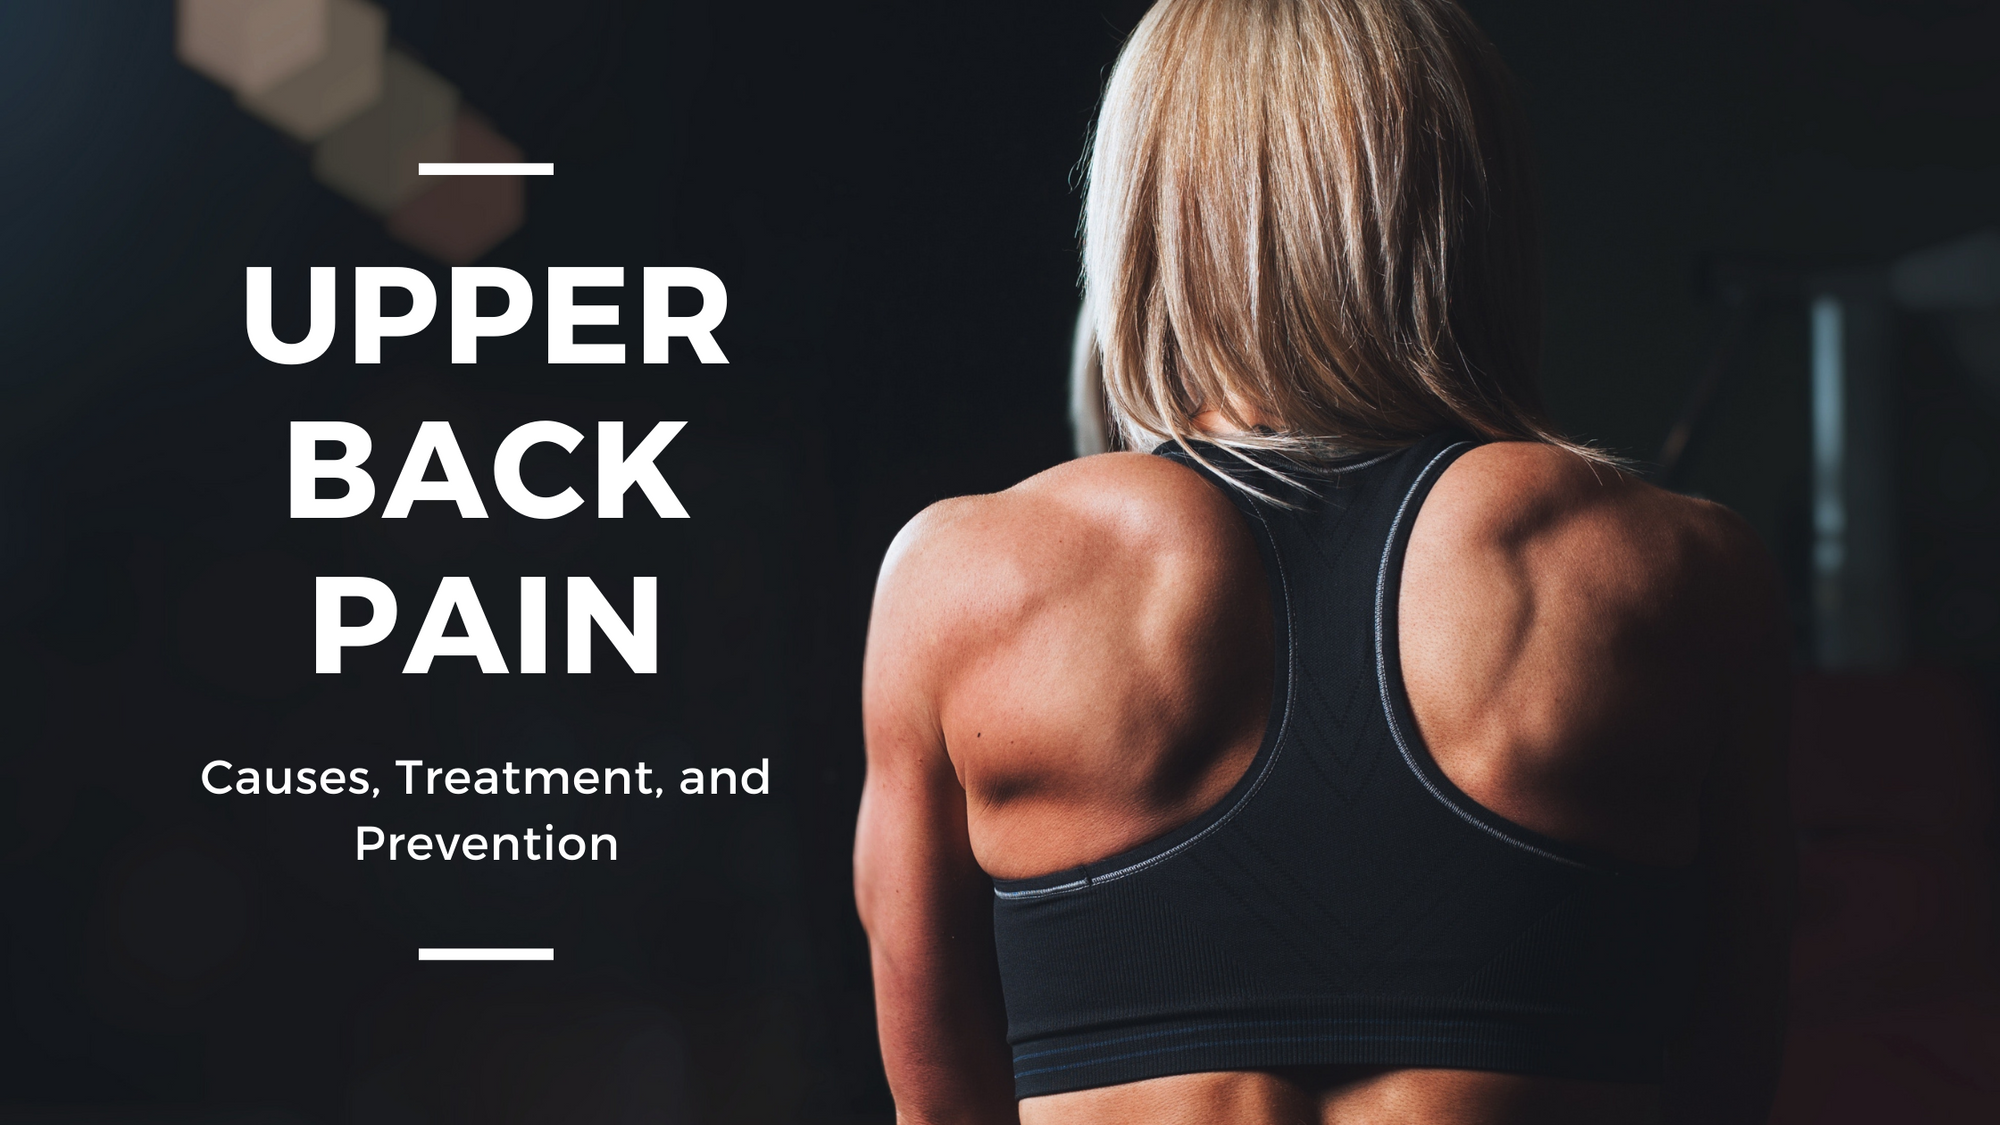 HOW TO TAPE FOR THE UPPER BACK